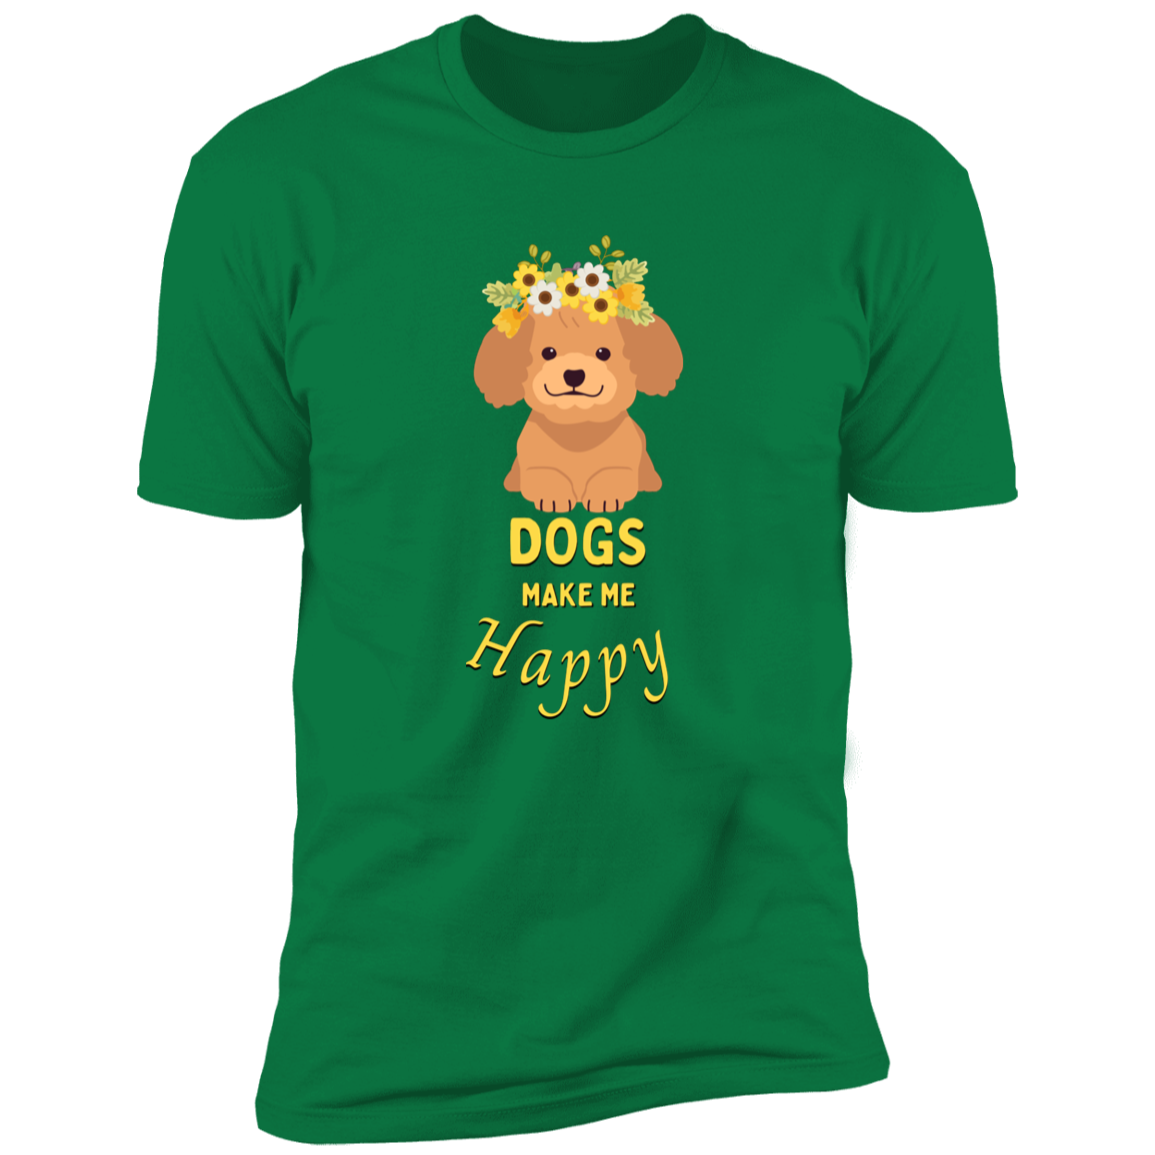 Dogs Make Me Happy t-shirt, funny dog shirt for humans, in kelly green